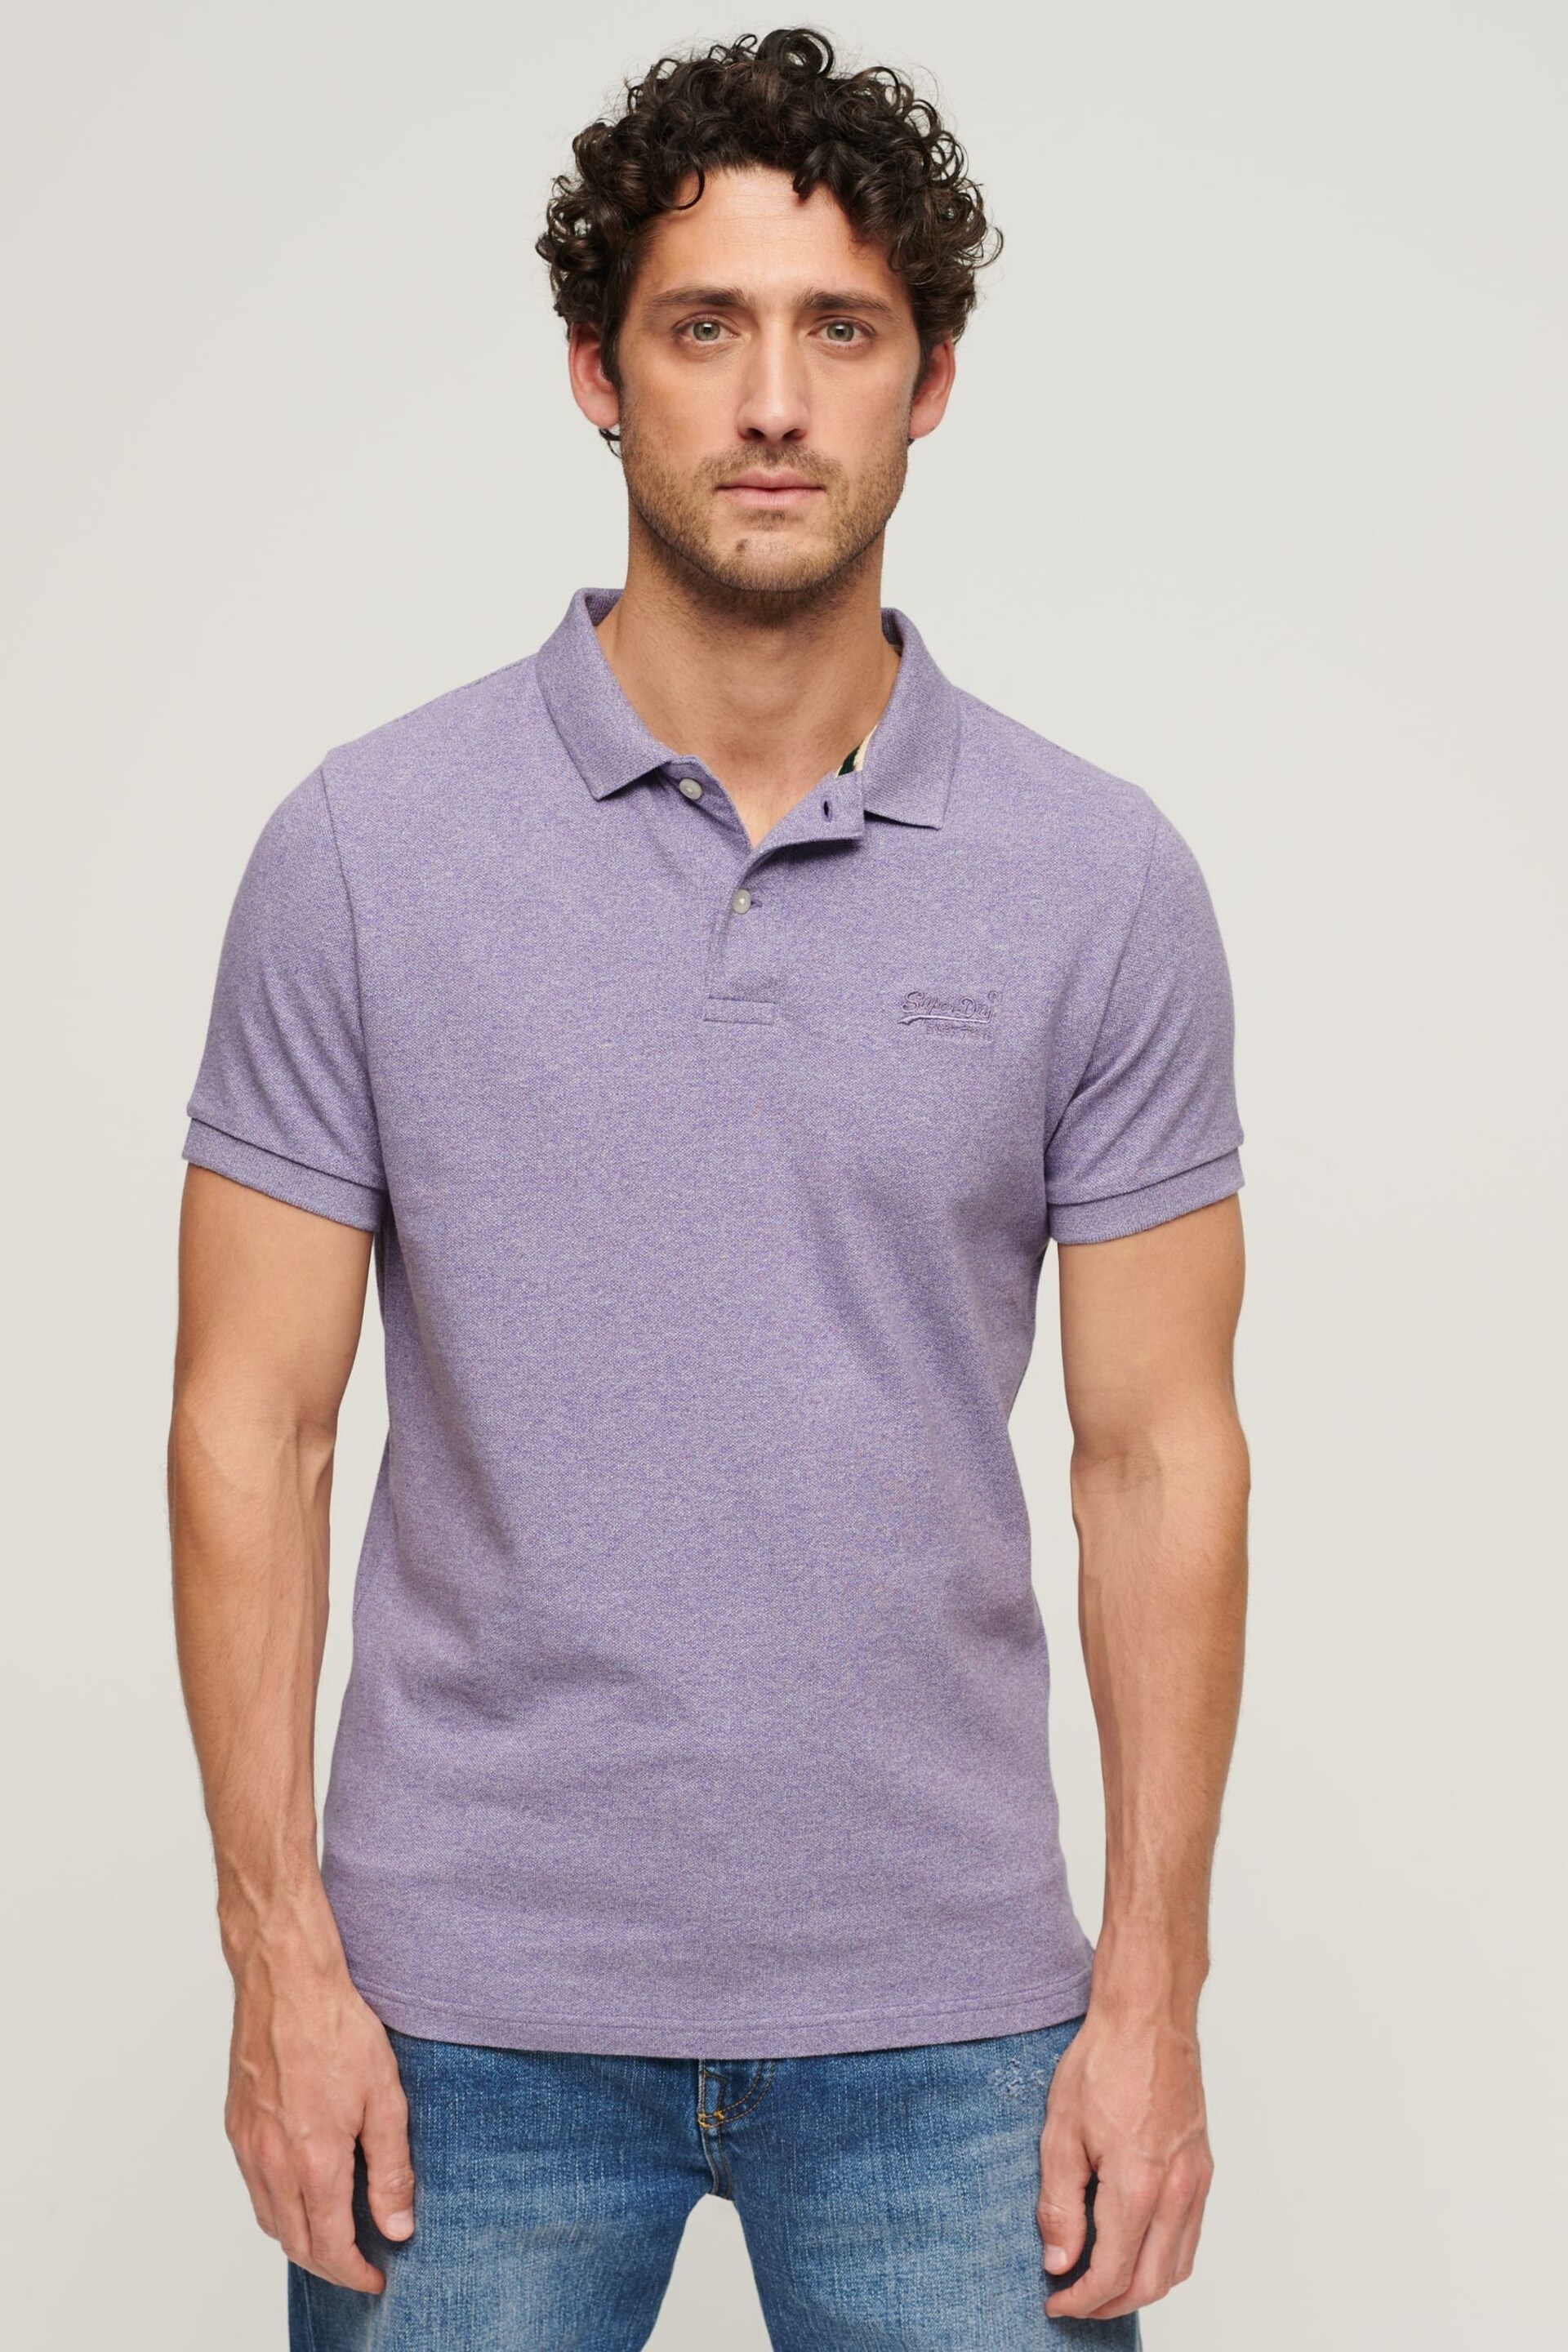 Superdry Purple Classic Pique Polo Shirt - Image 1 of 3